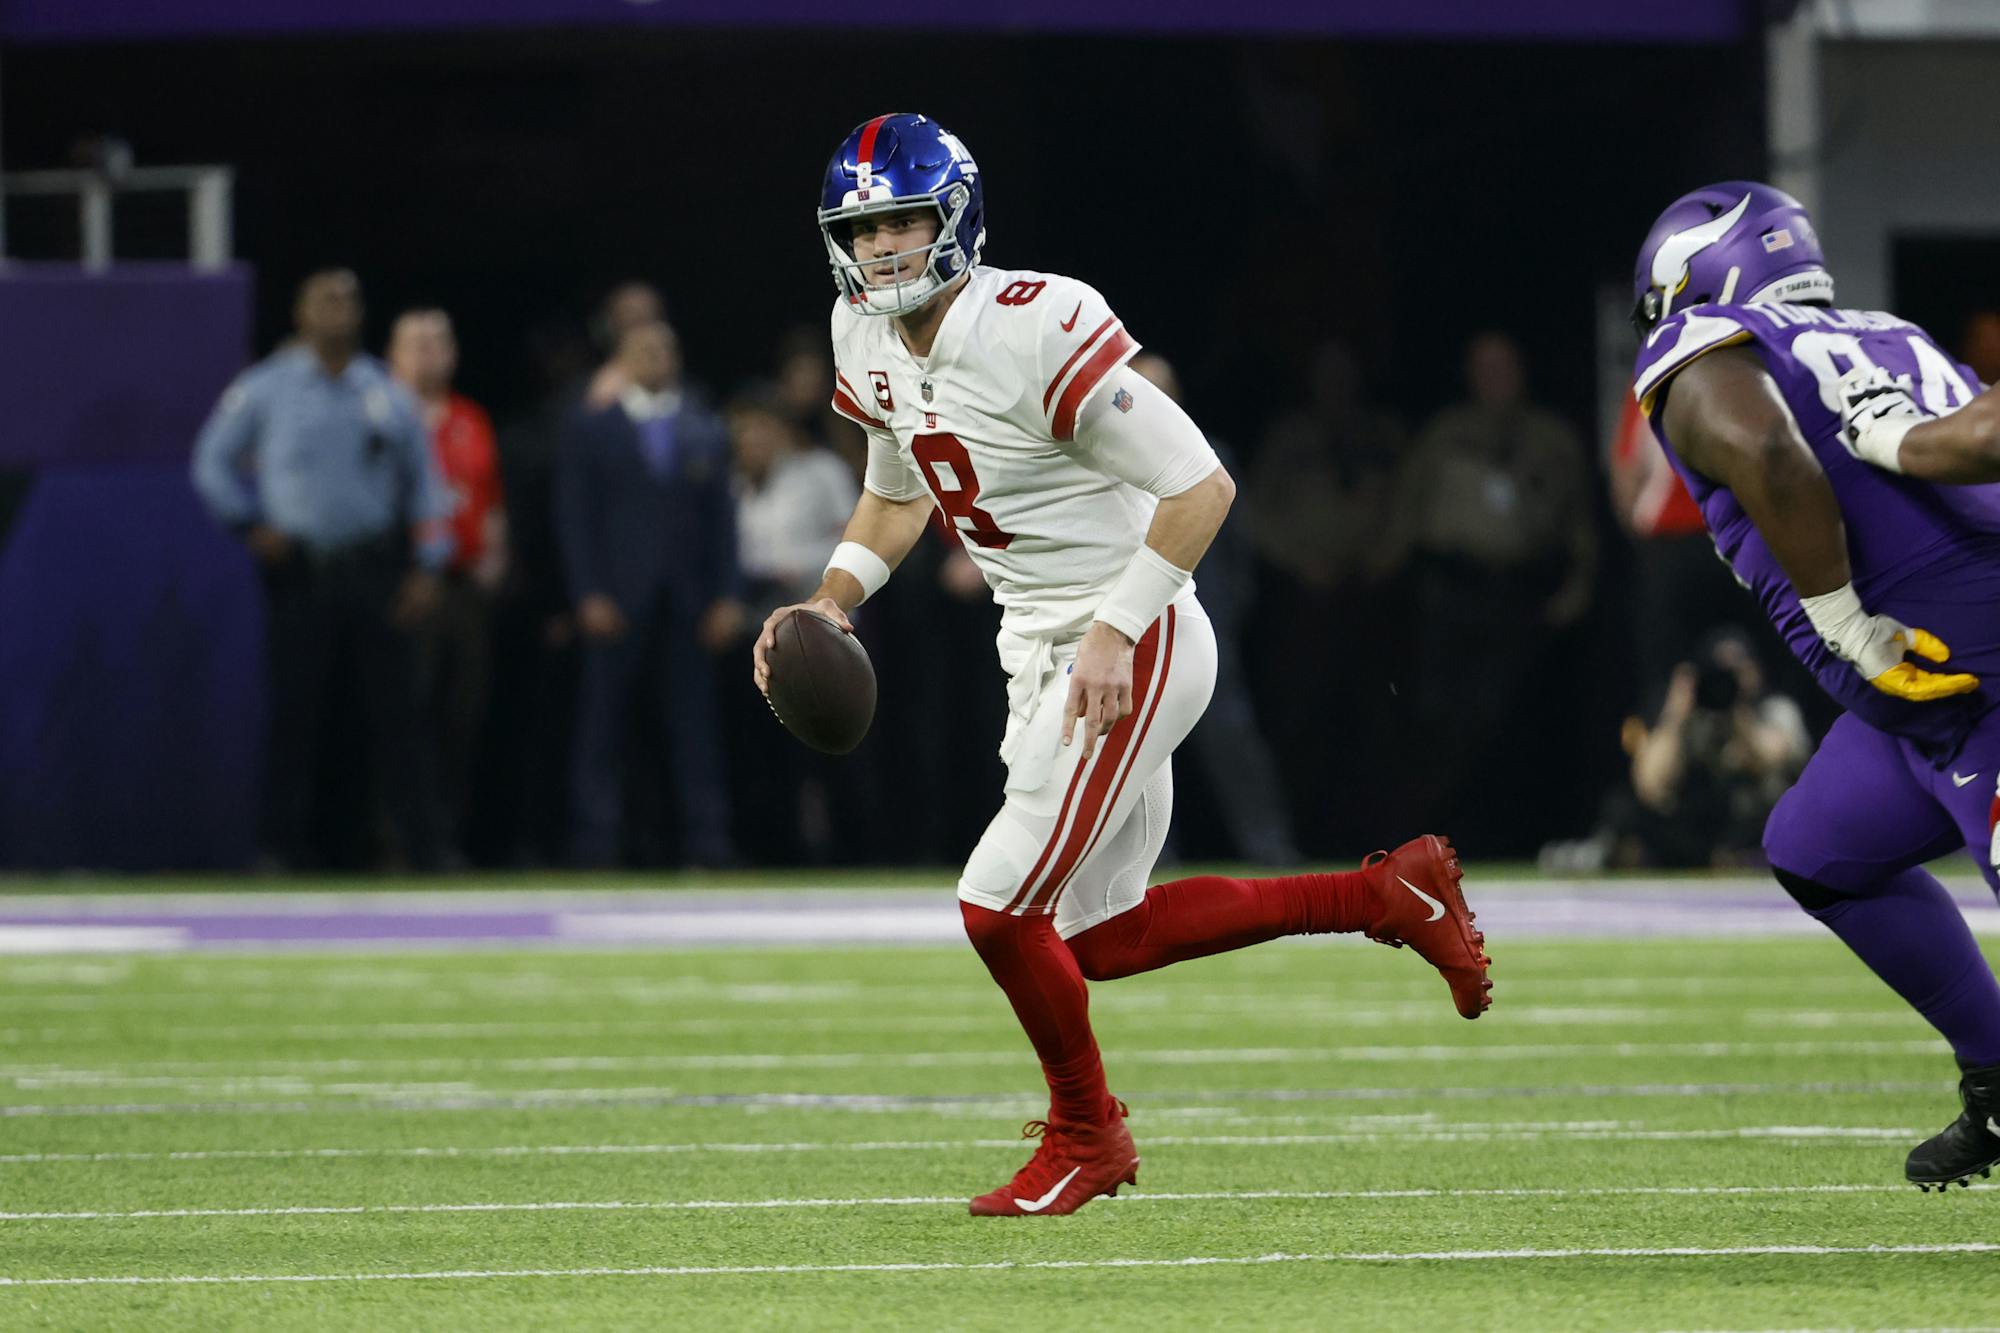 NFL picks: Best player prop bets for Giants-Seahawks on Monday